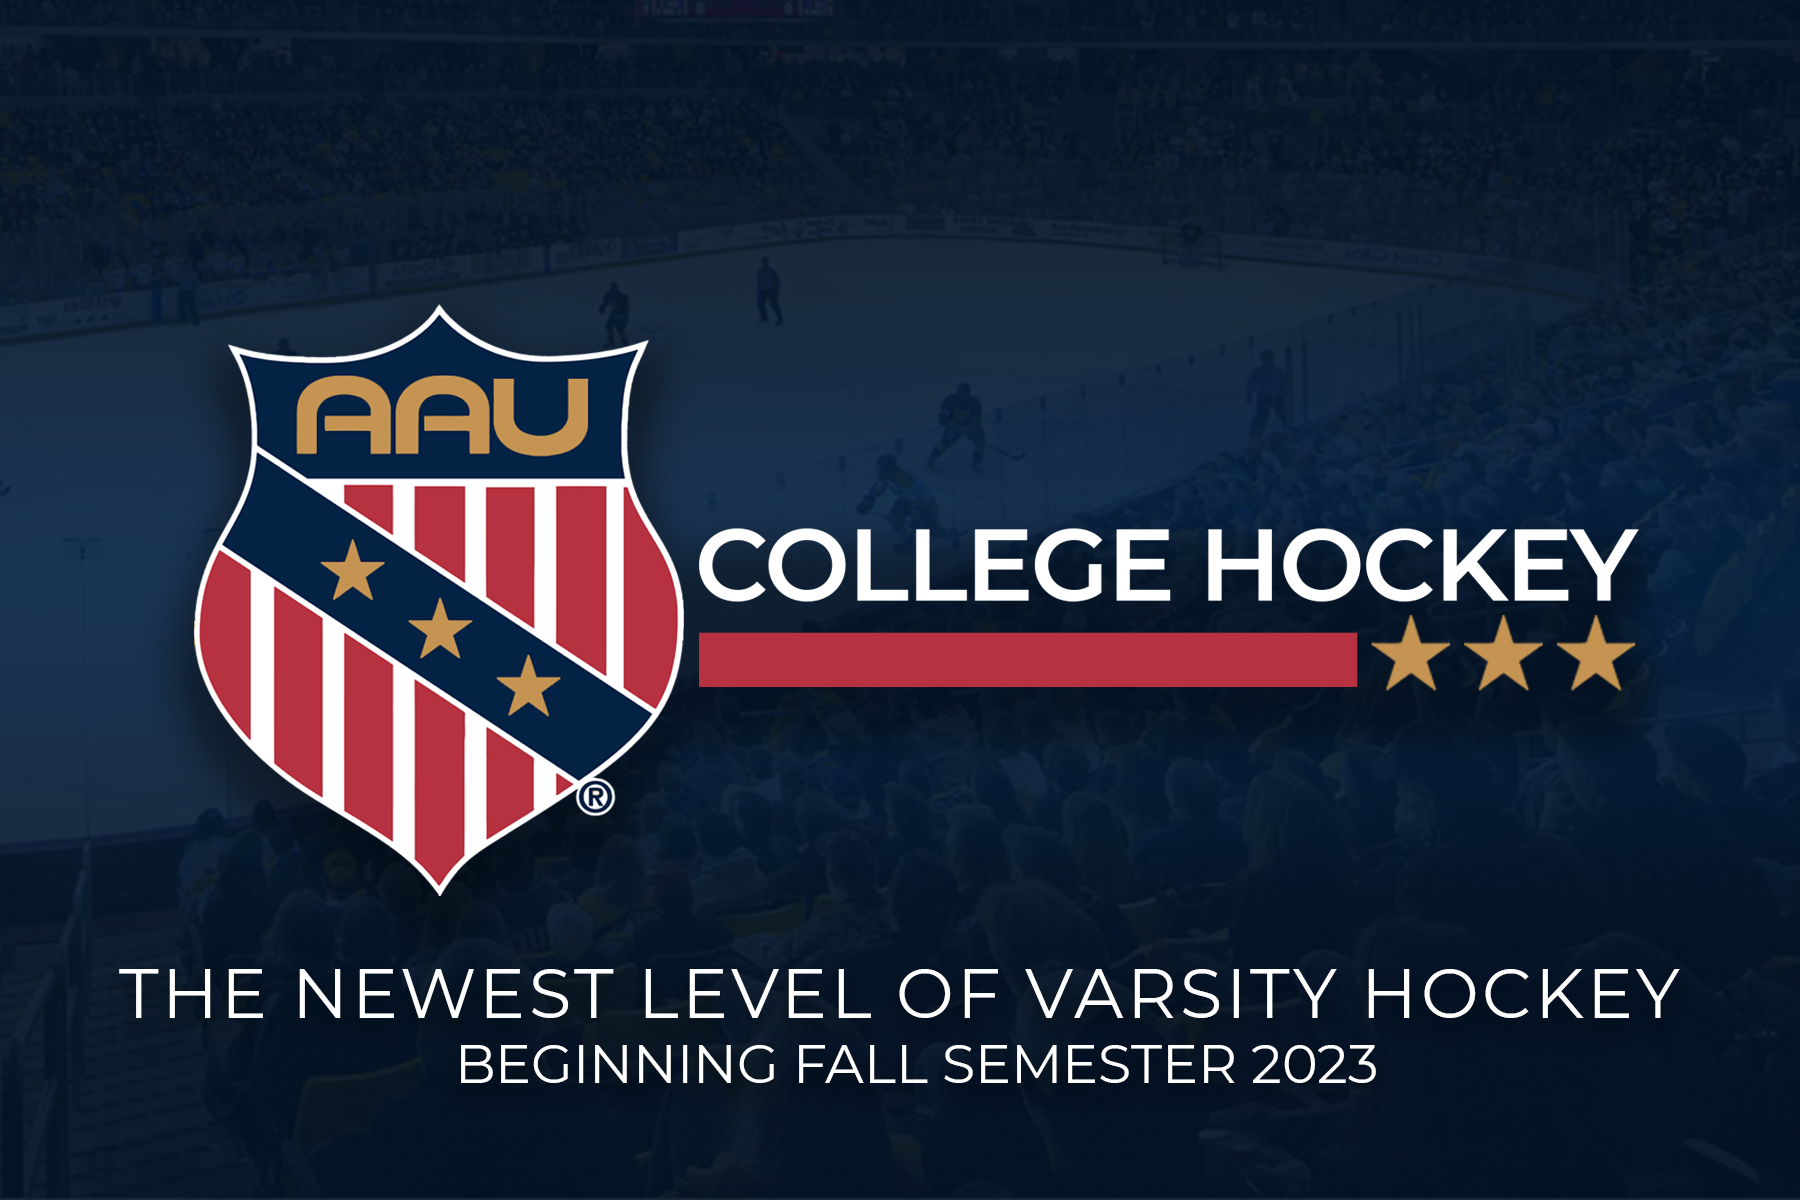 Collegiate Hockey Federation, Amateur Athletic Union joining to launch